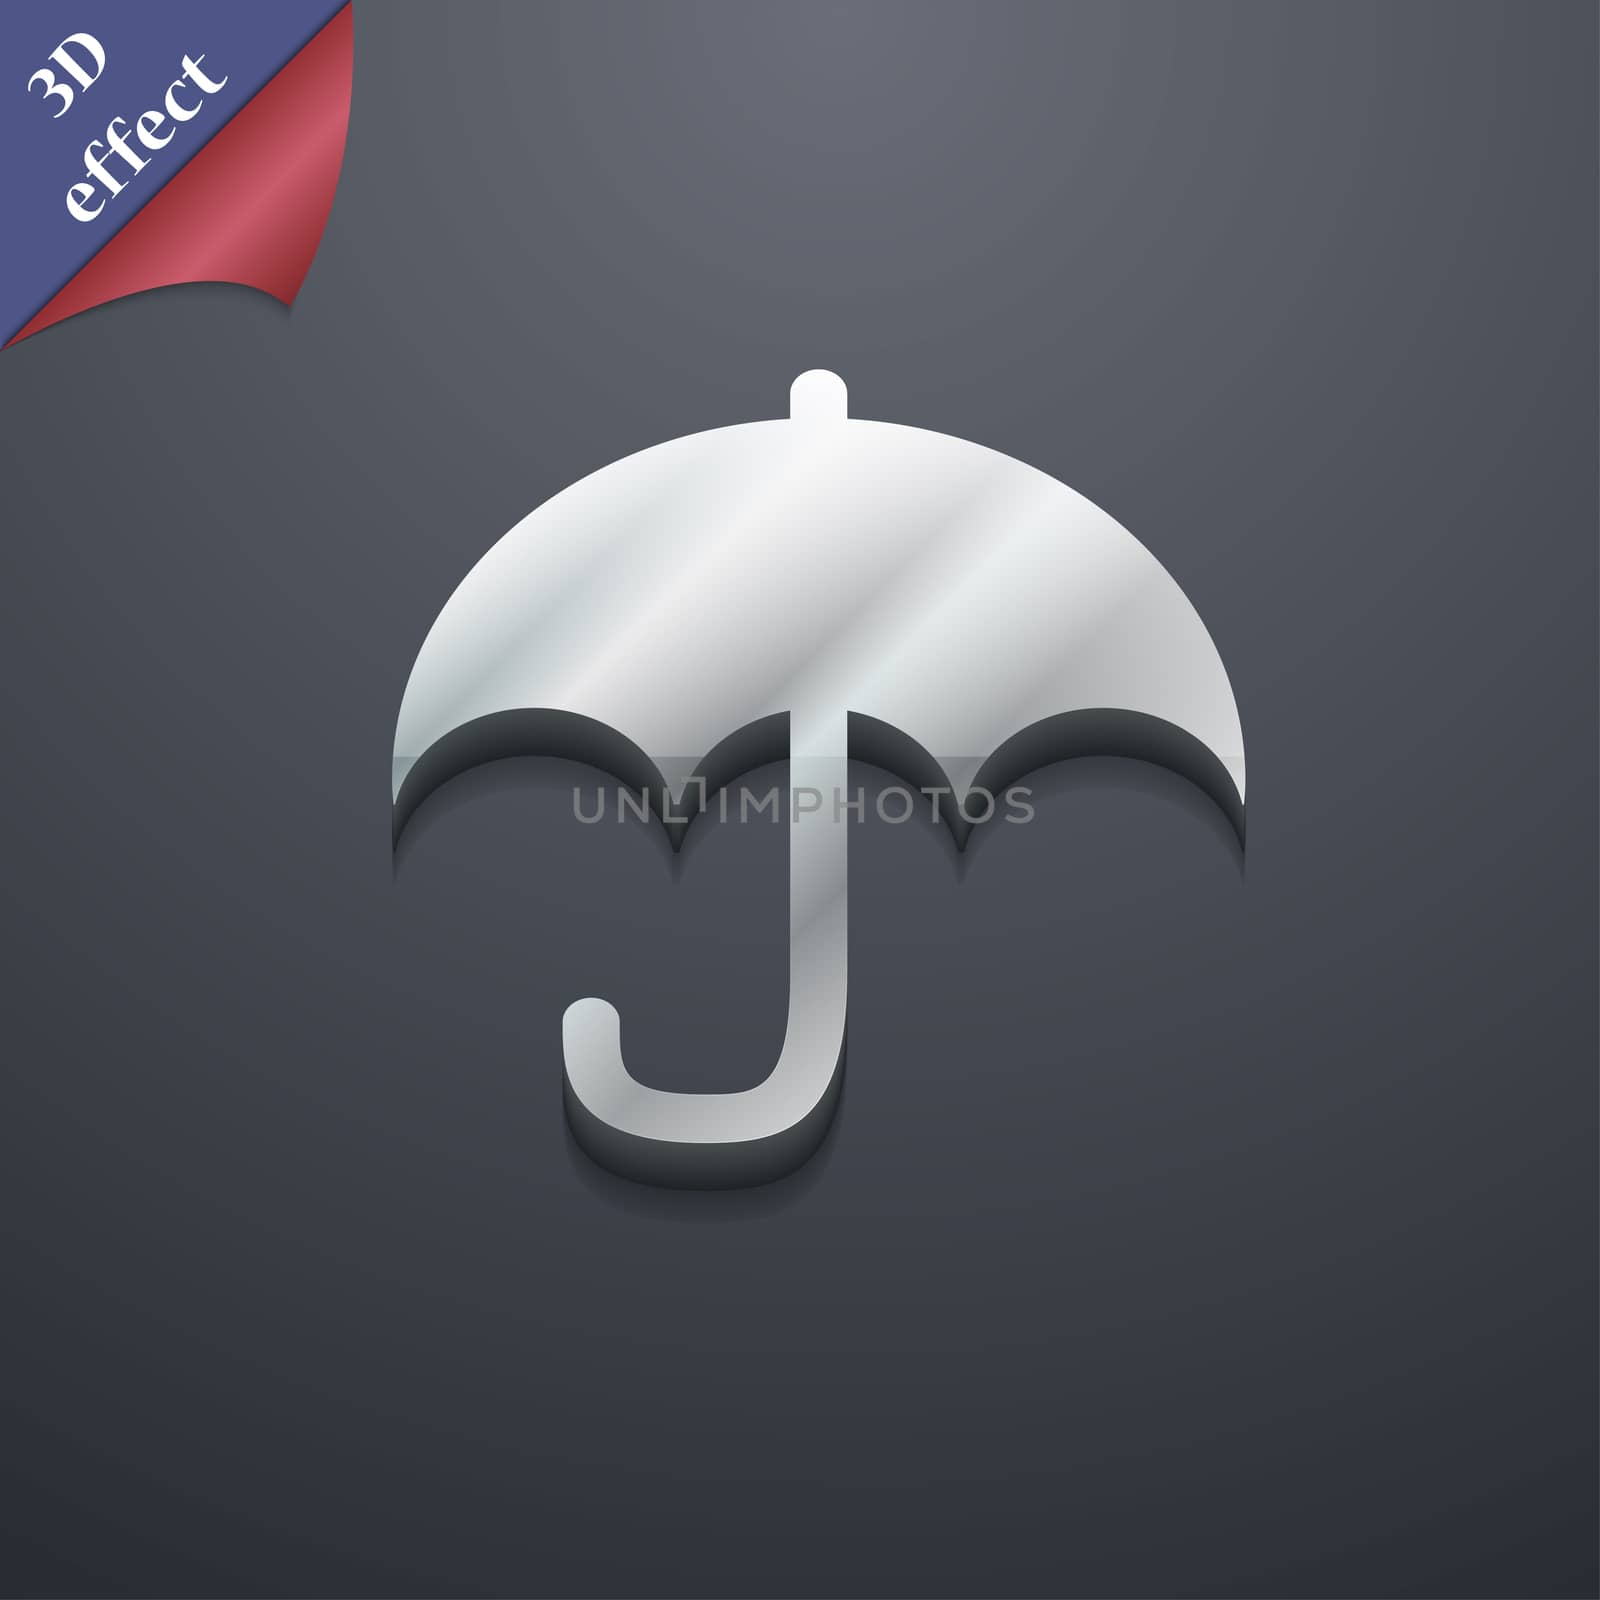 Umbrella icon symbol. 3D style. Trendy, modern design with space for your text illustration. Rastrized copy